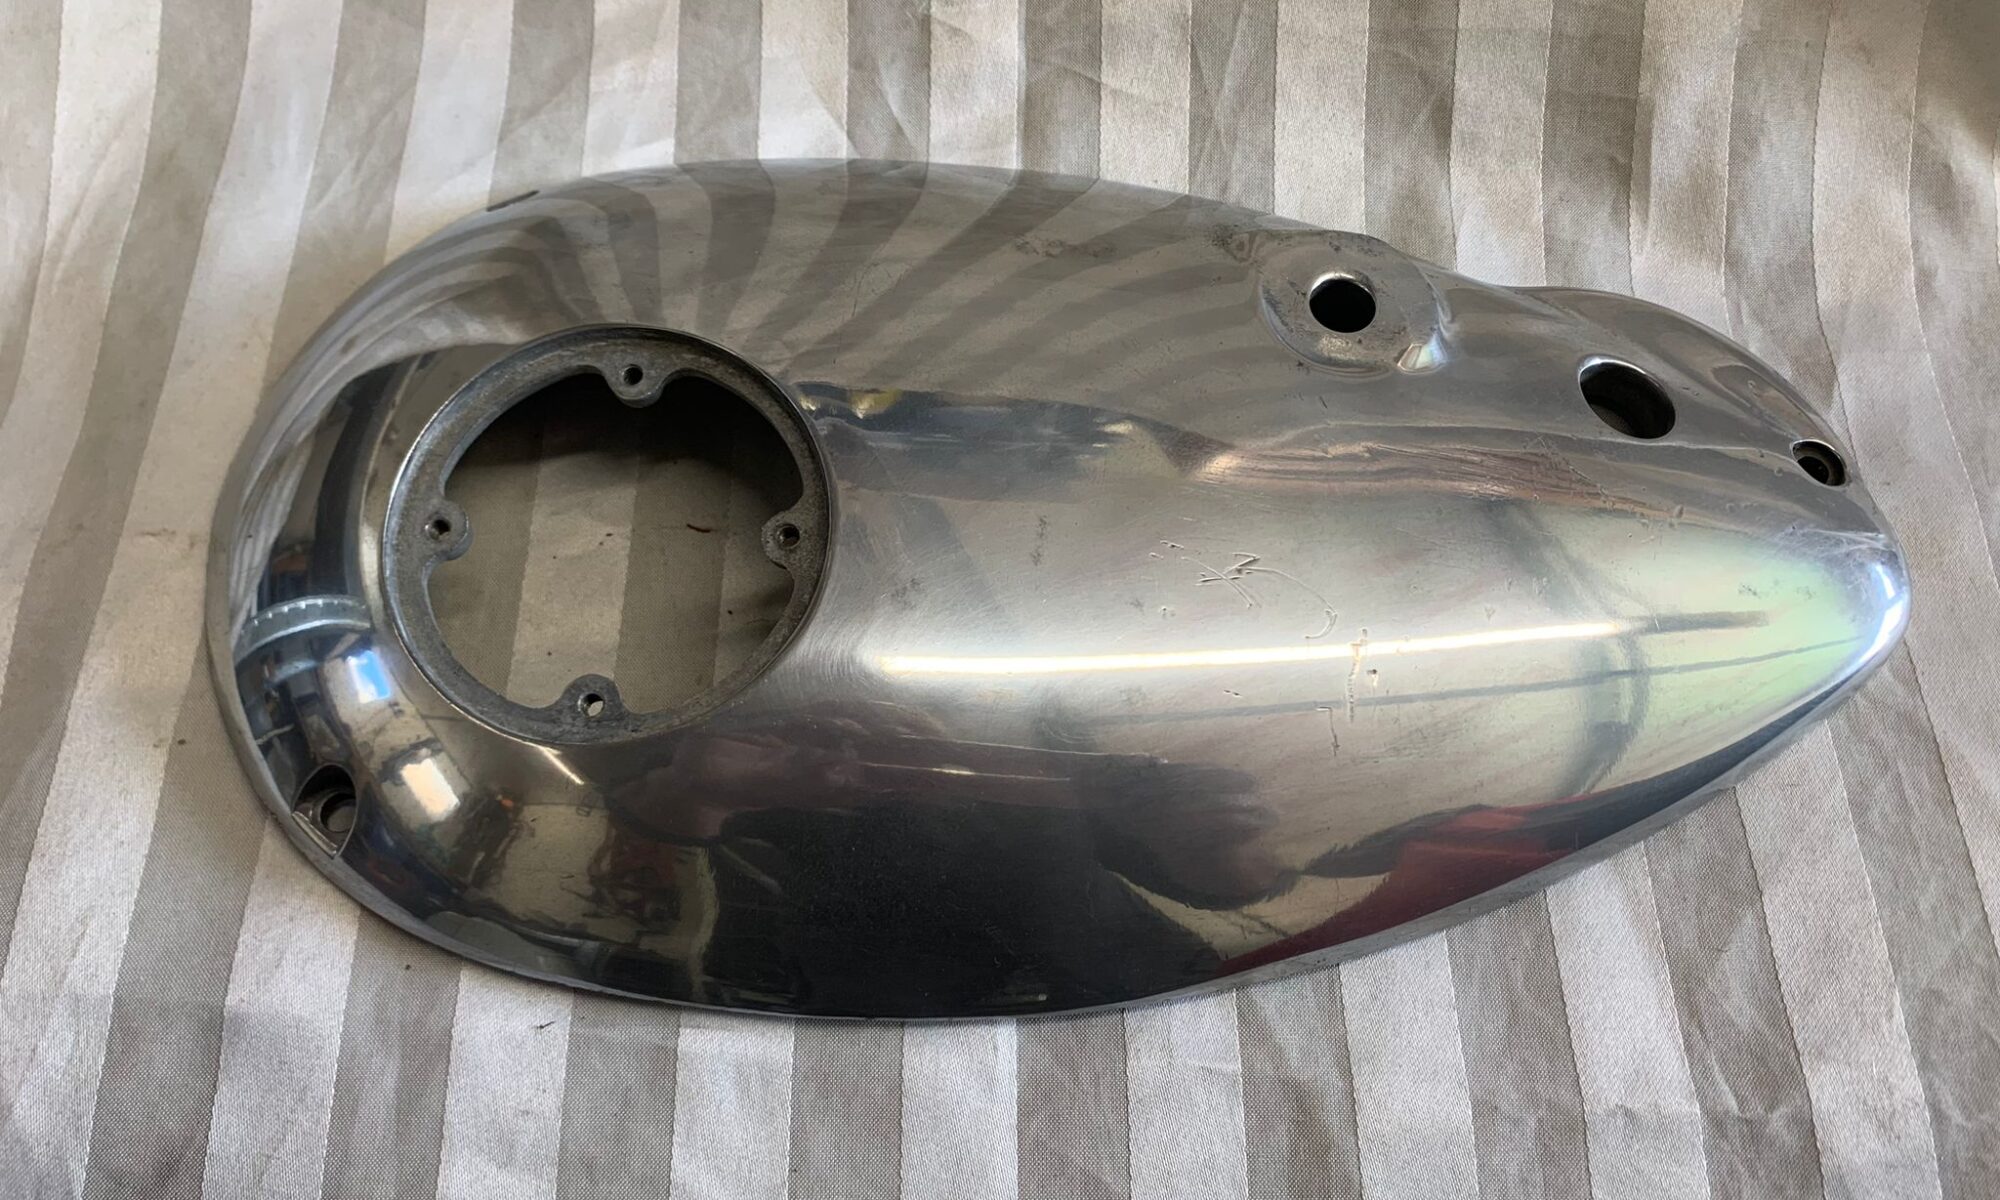 BSA 68-227 TIMING SIDE COVER